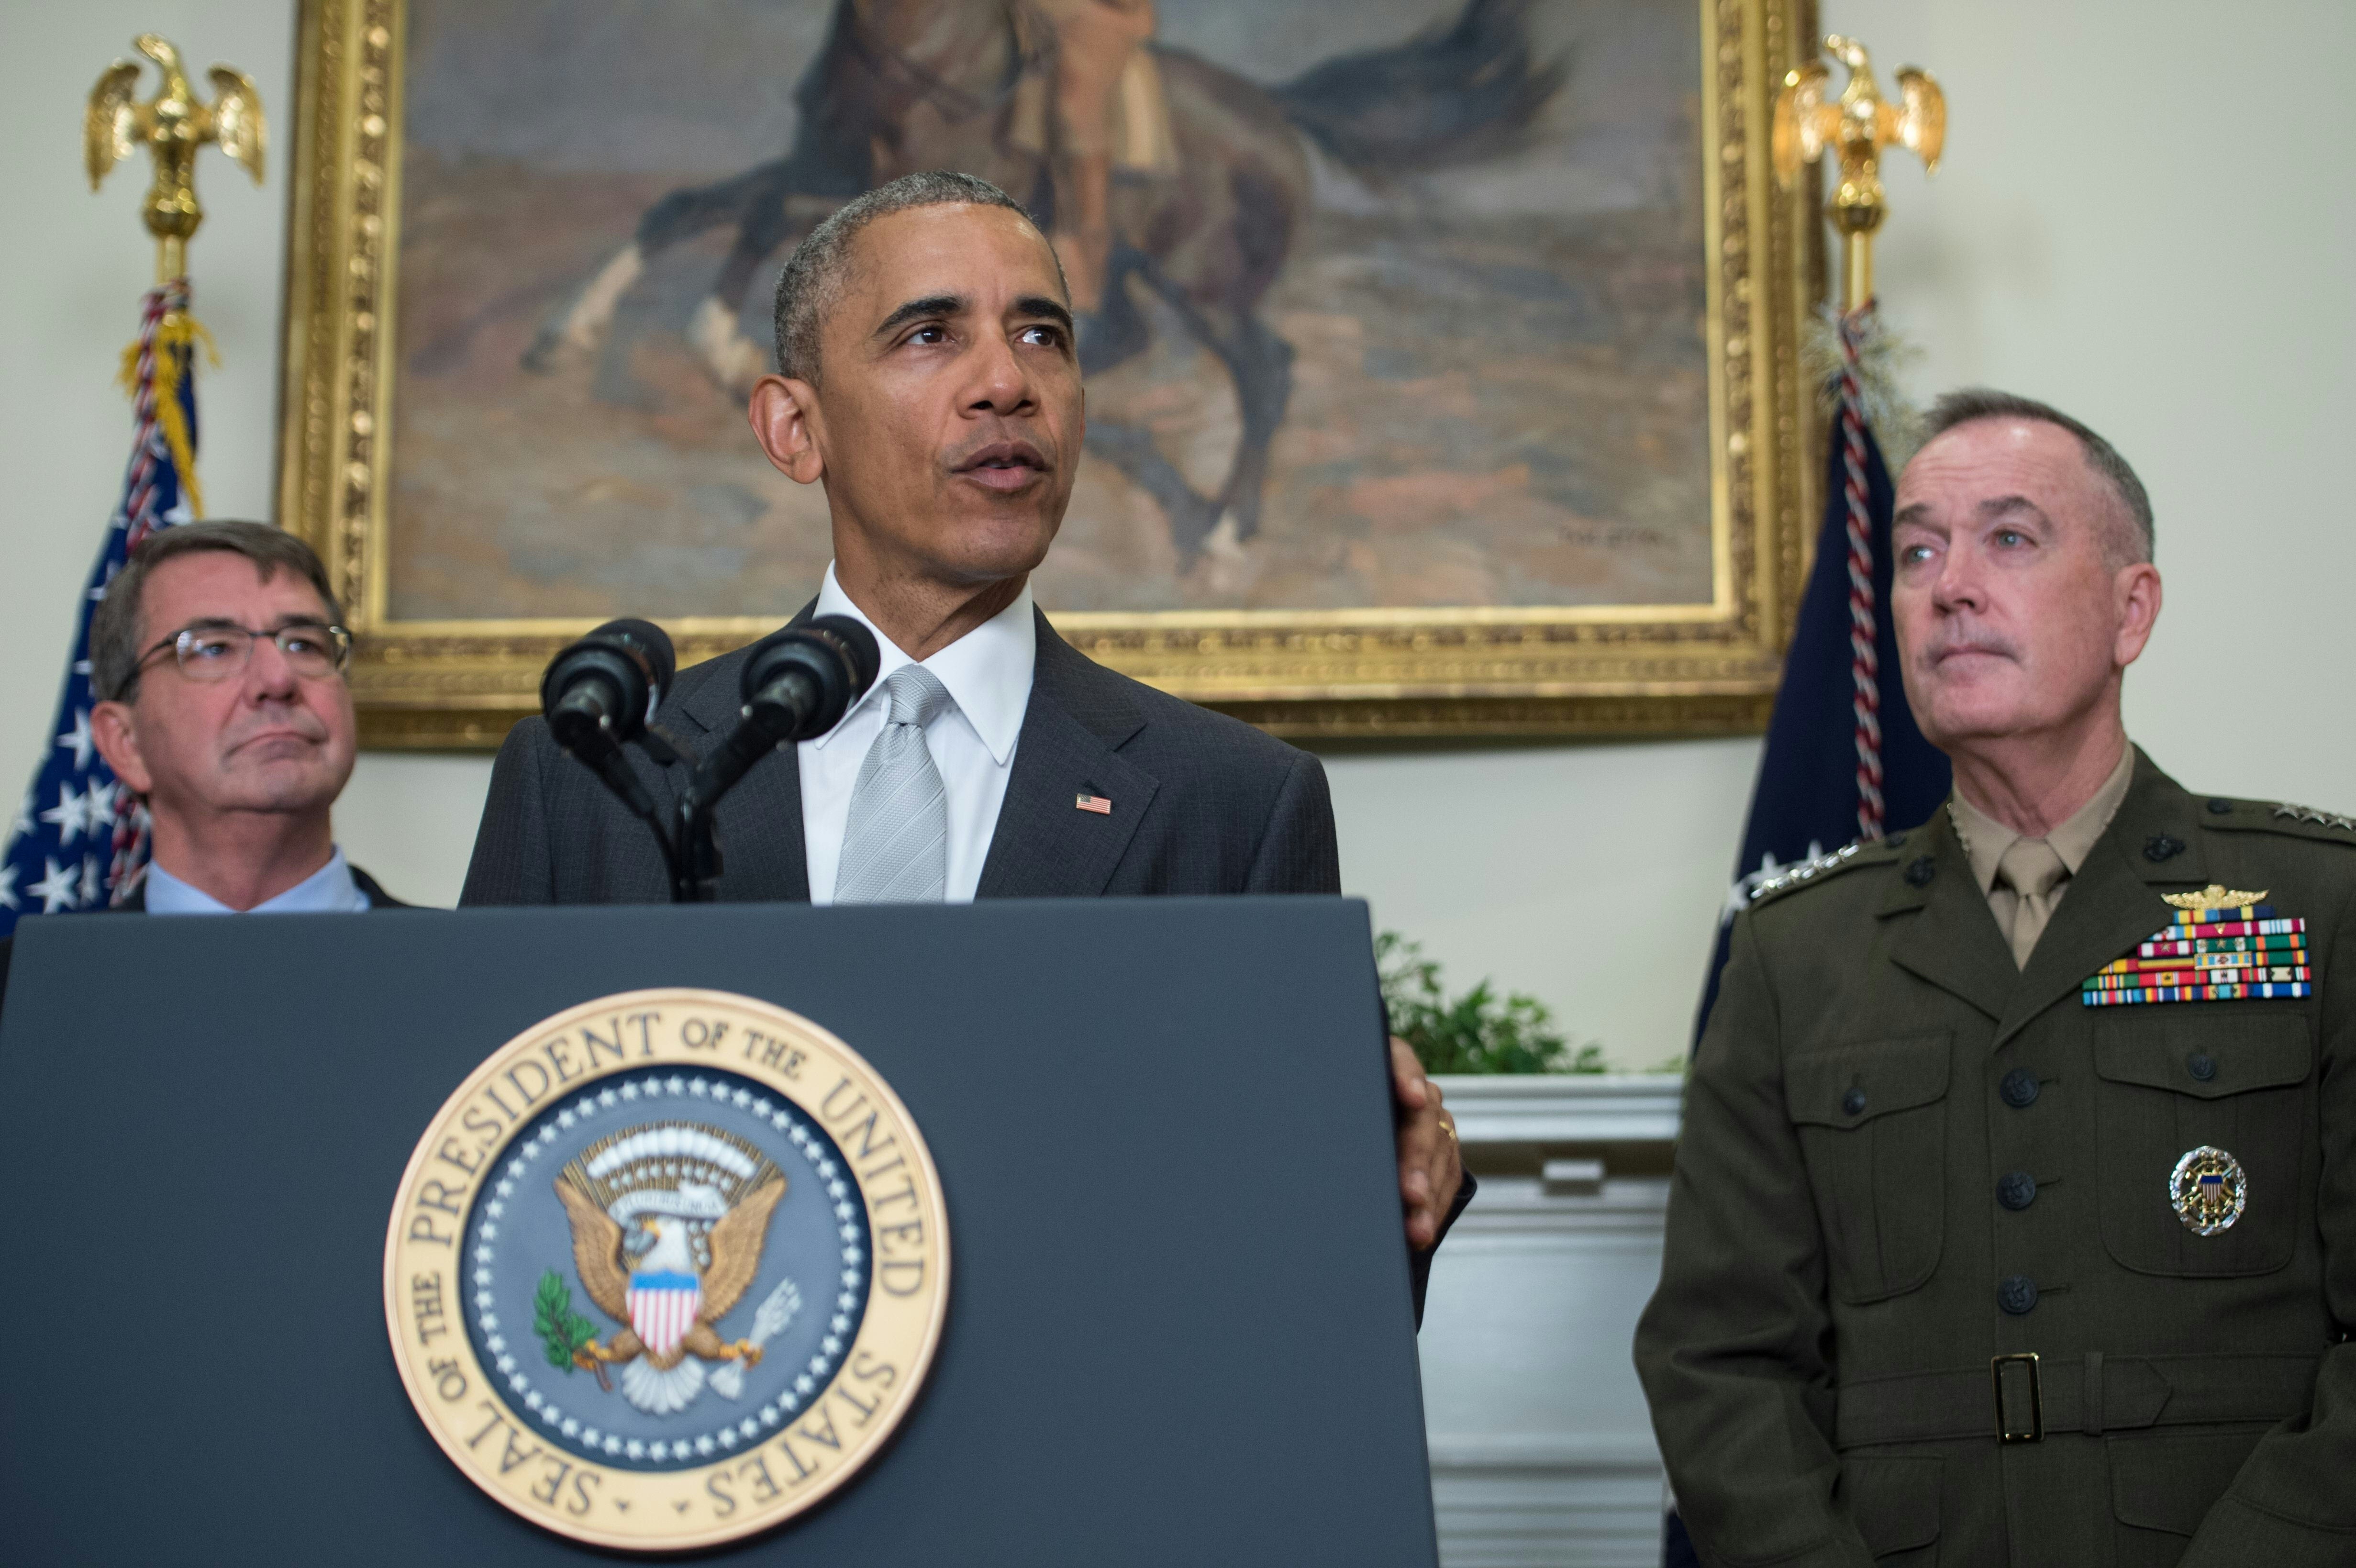 US President Barack Obama delivers a statement on Afghanistan with Defense Secretary Ashton Carter (L) and the Chairman of the Joint Chiefs of Staff Gen. Joseph Dunford at the White House in Washington, DC, on July 6, 2016. Obama announced that 8,400 US troops will remain in Afghanistan into 2017 in light of the still "precarious" security situation in the war-ravaged country.  / AFP PHOTO / NICHOLAS KAMM